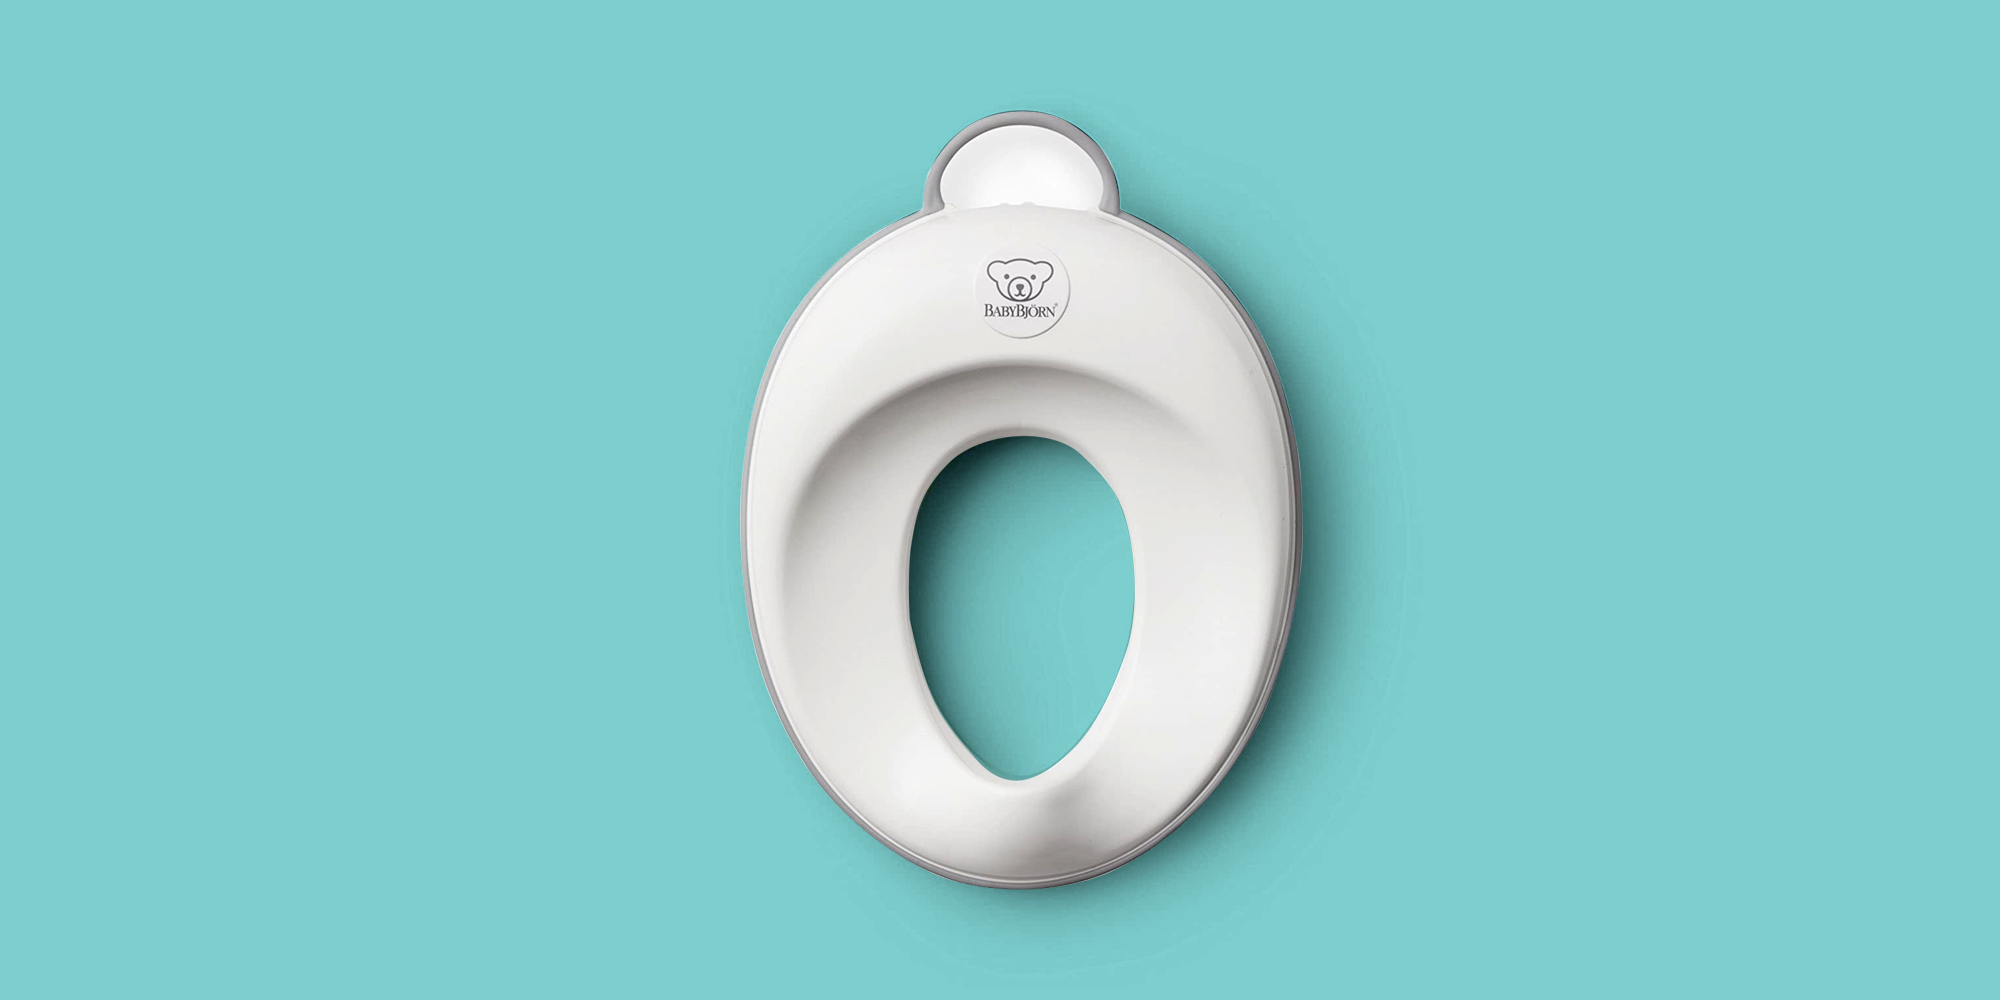 Anti-Slip Potty Training Toilet Seat for Boys or Girls Potty Seat Luchild Toddlers Toilet Trainer Ring with Splash Guard Handles and Backrest 